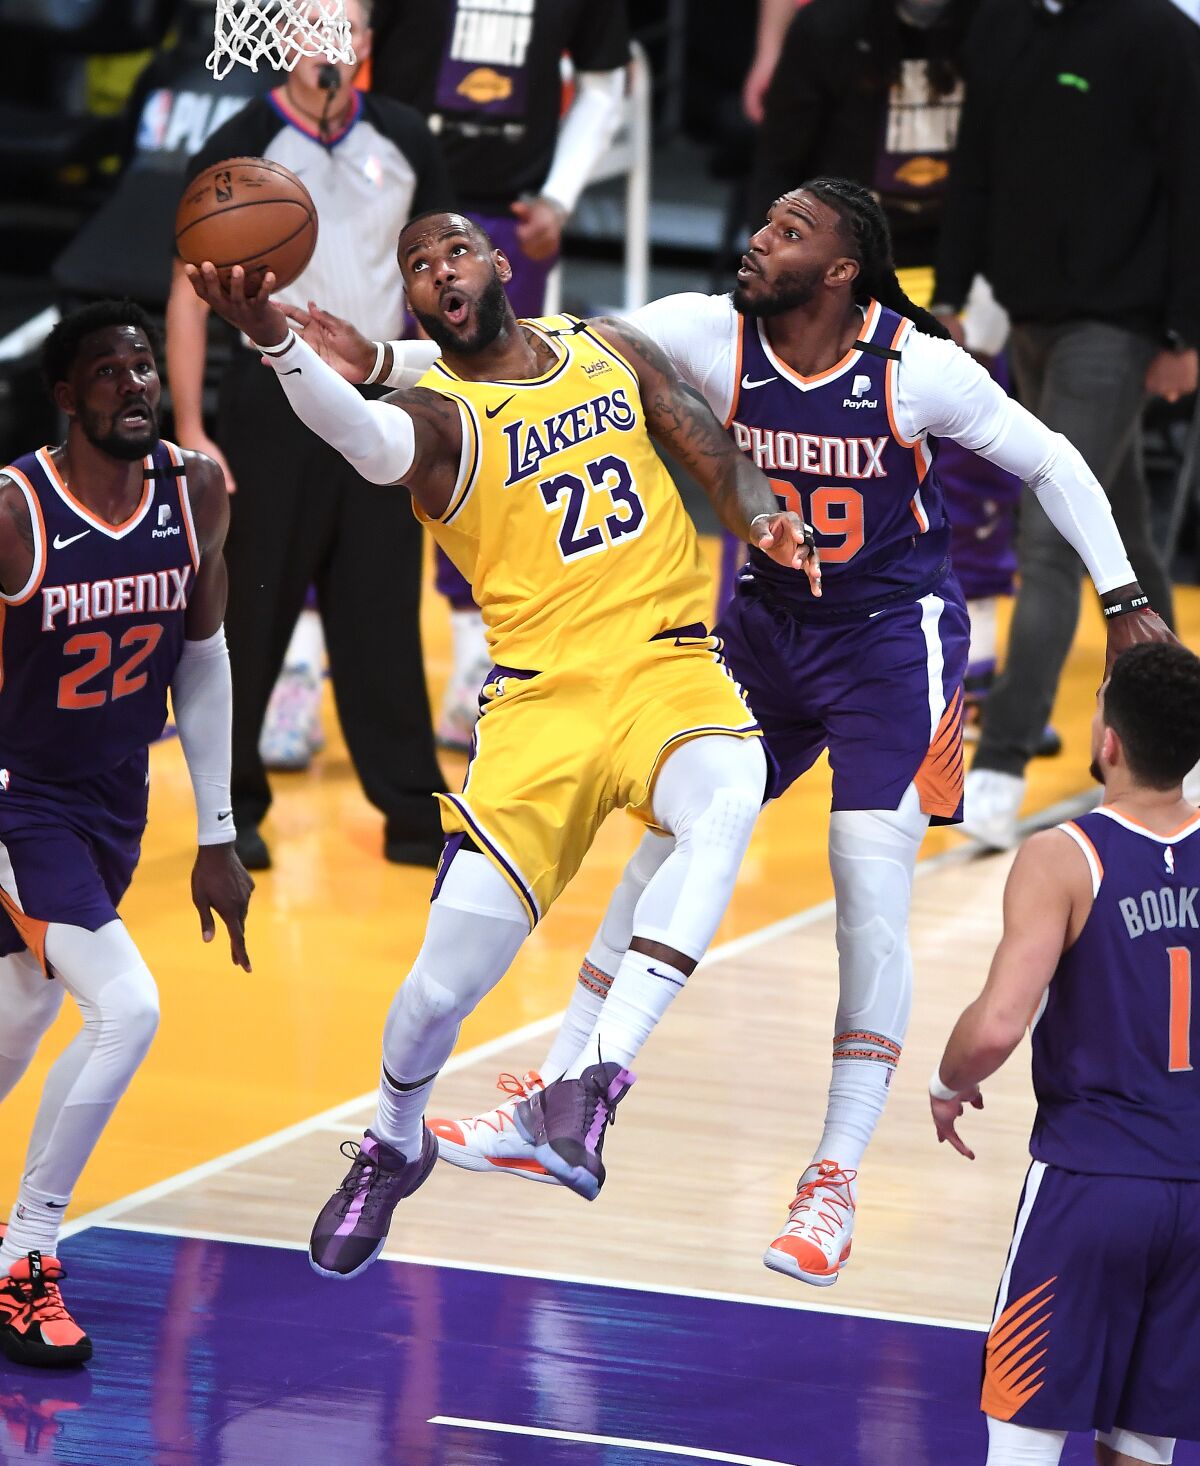 Lakers forward LeBron James scores on a reverse layup against Suns forward Jae Crowder in the fourth quarter of Game 3.